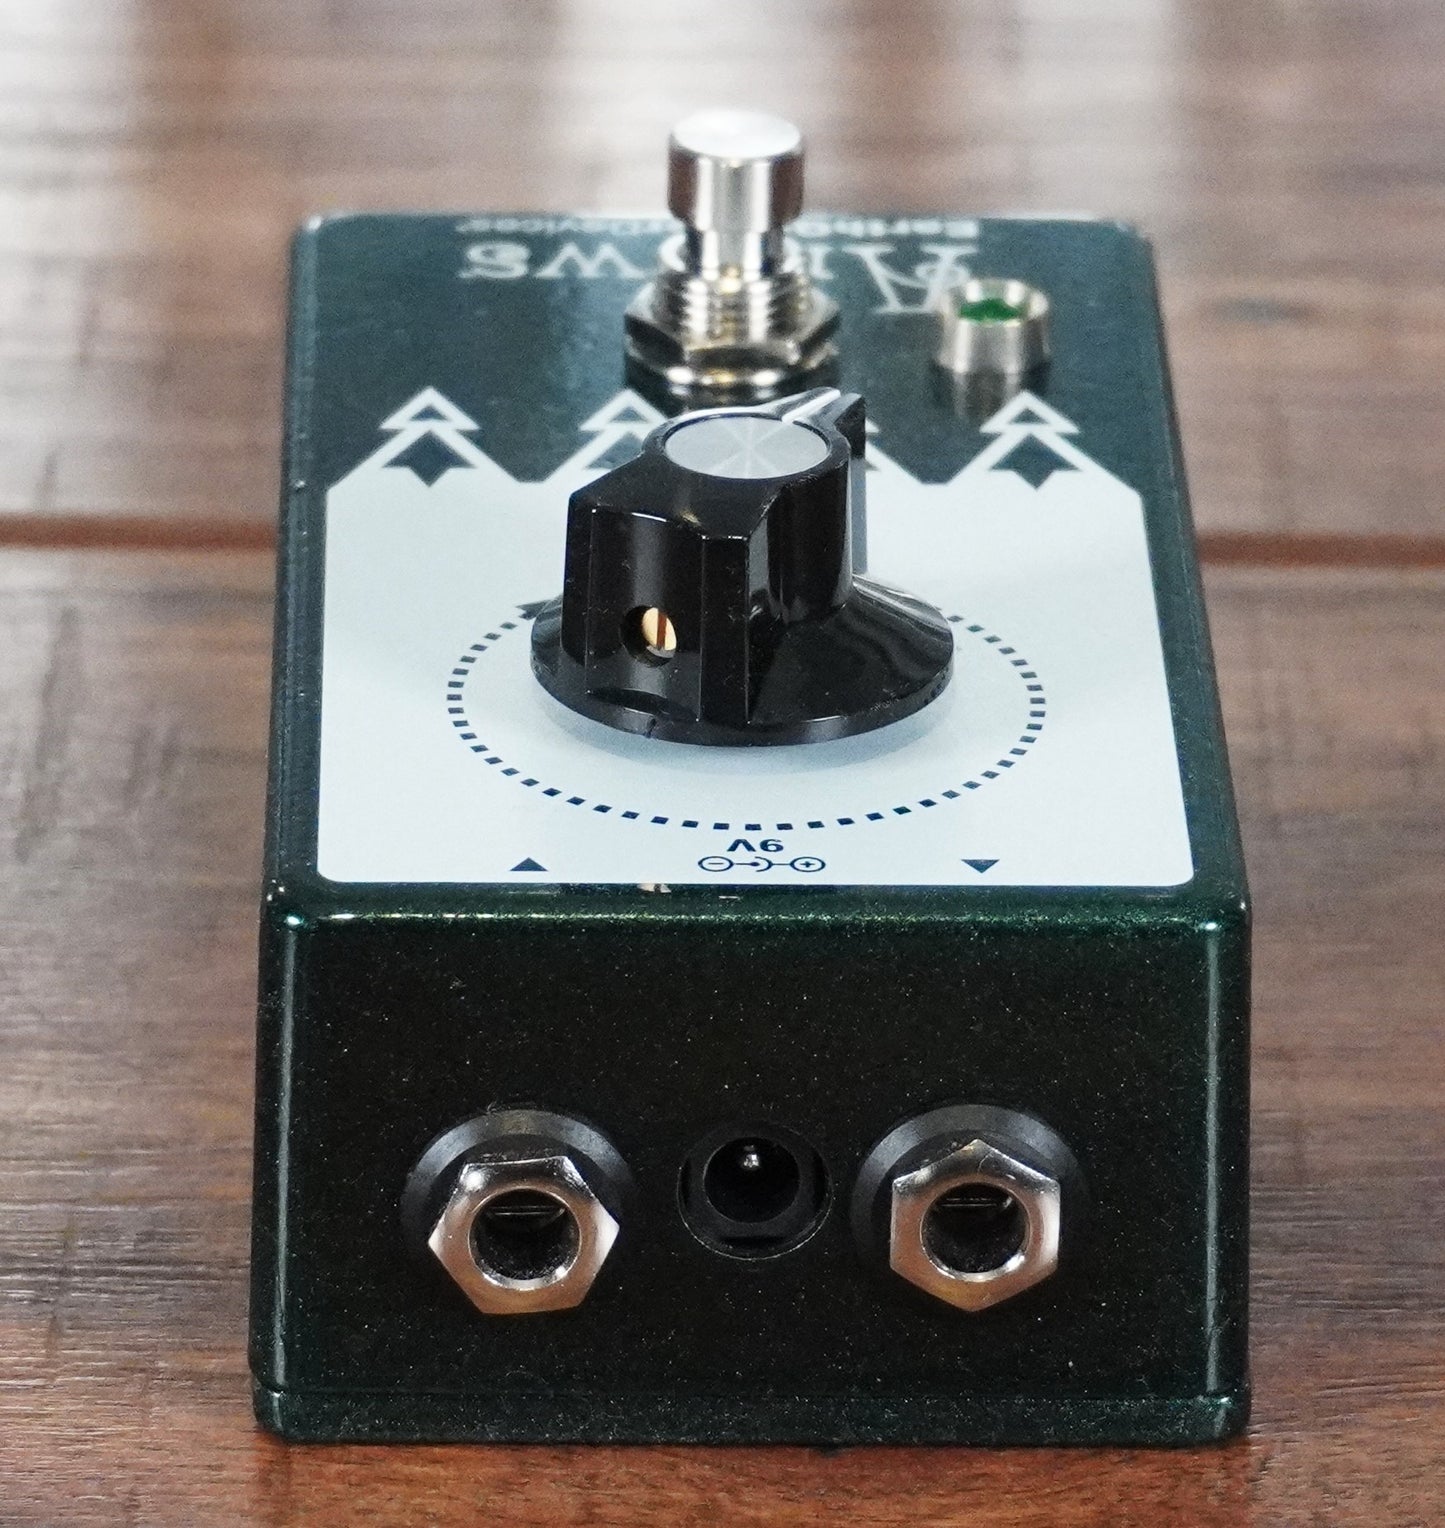 Earthquaker Devices EQD Arrows Preamp Booster V2 Guitar Effect Pedal